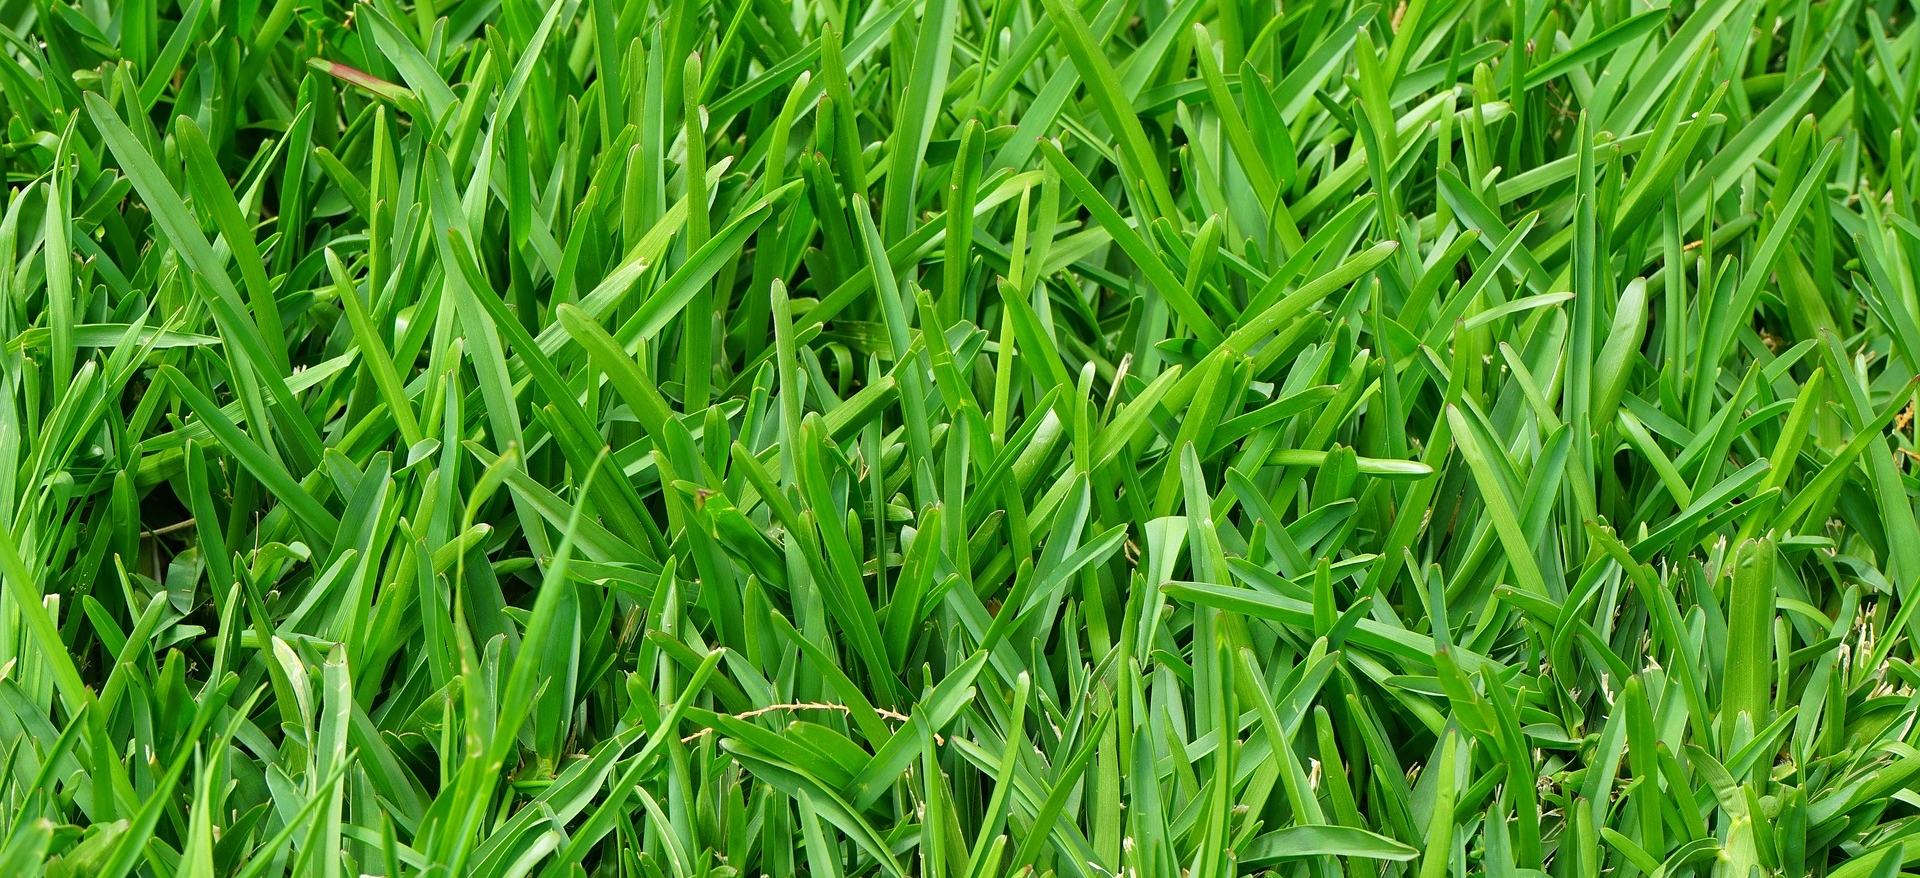 grass lawn green landscape landscaping home yard